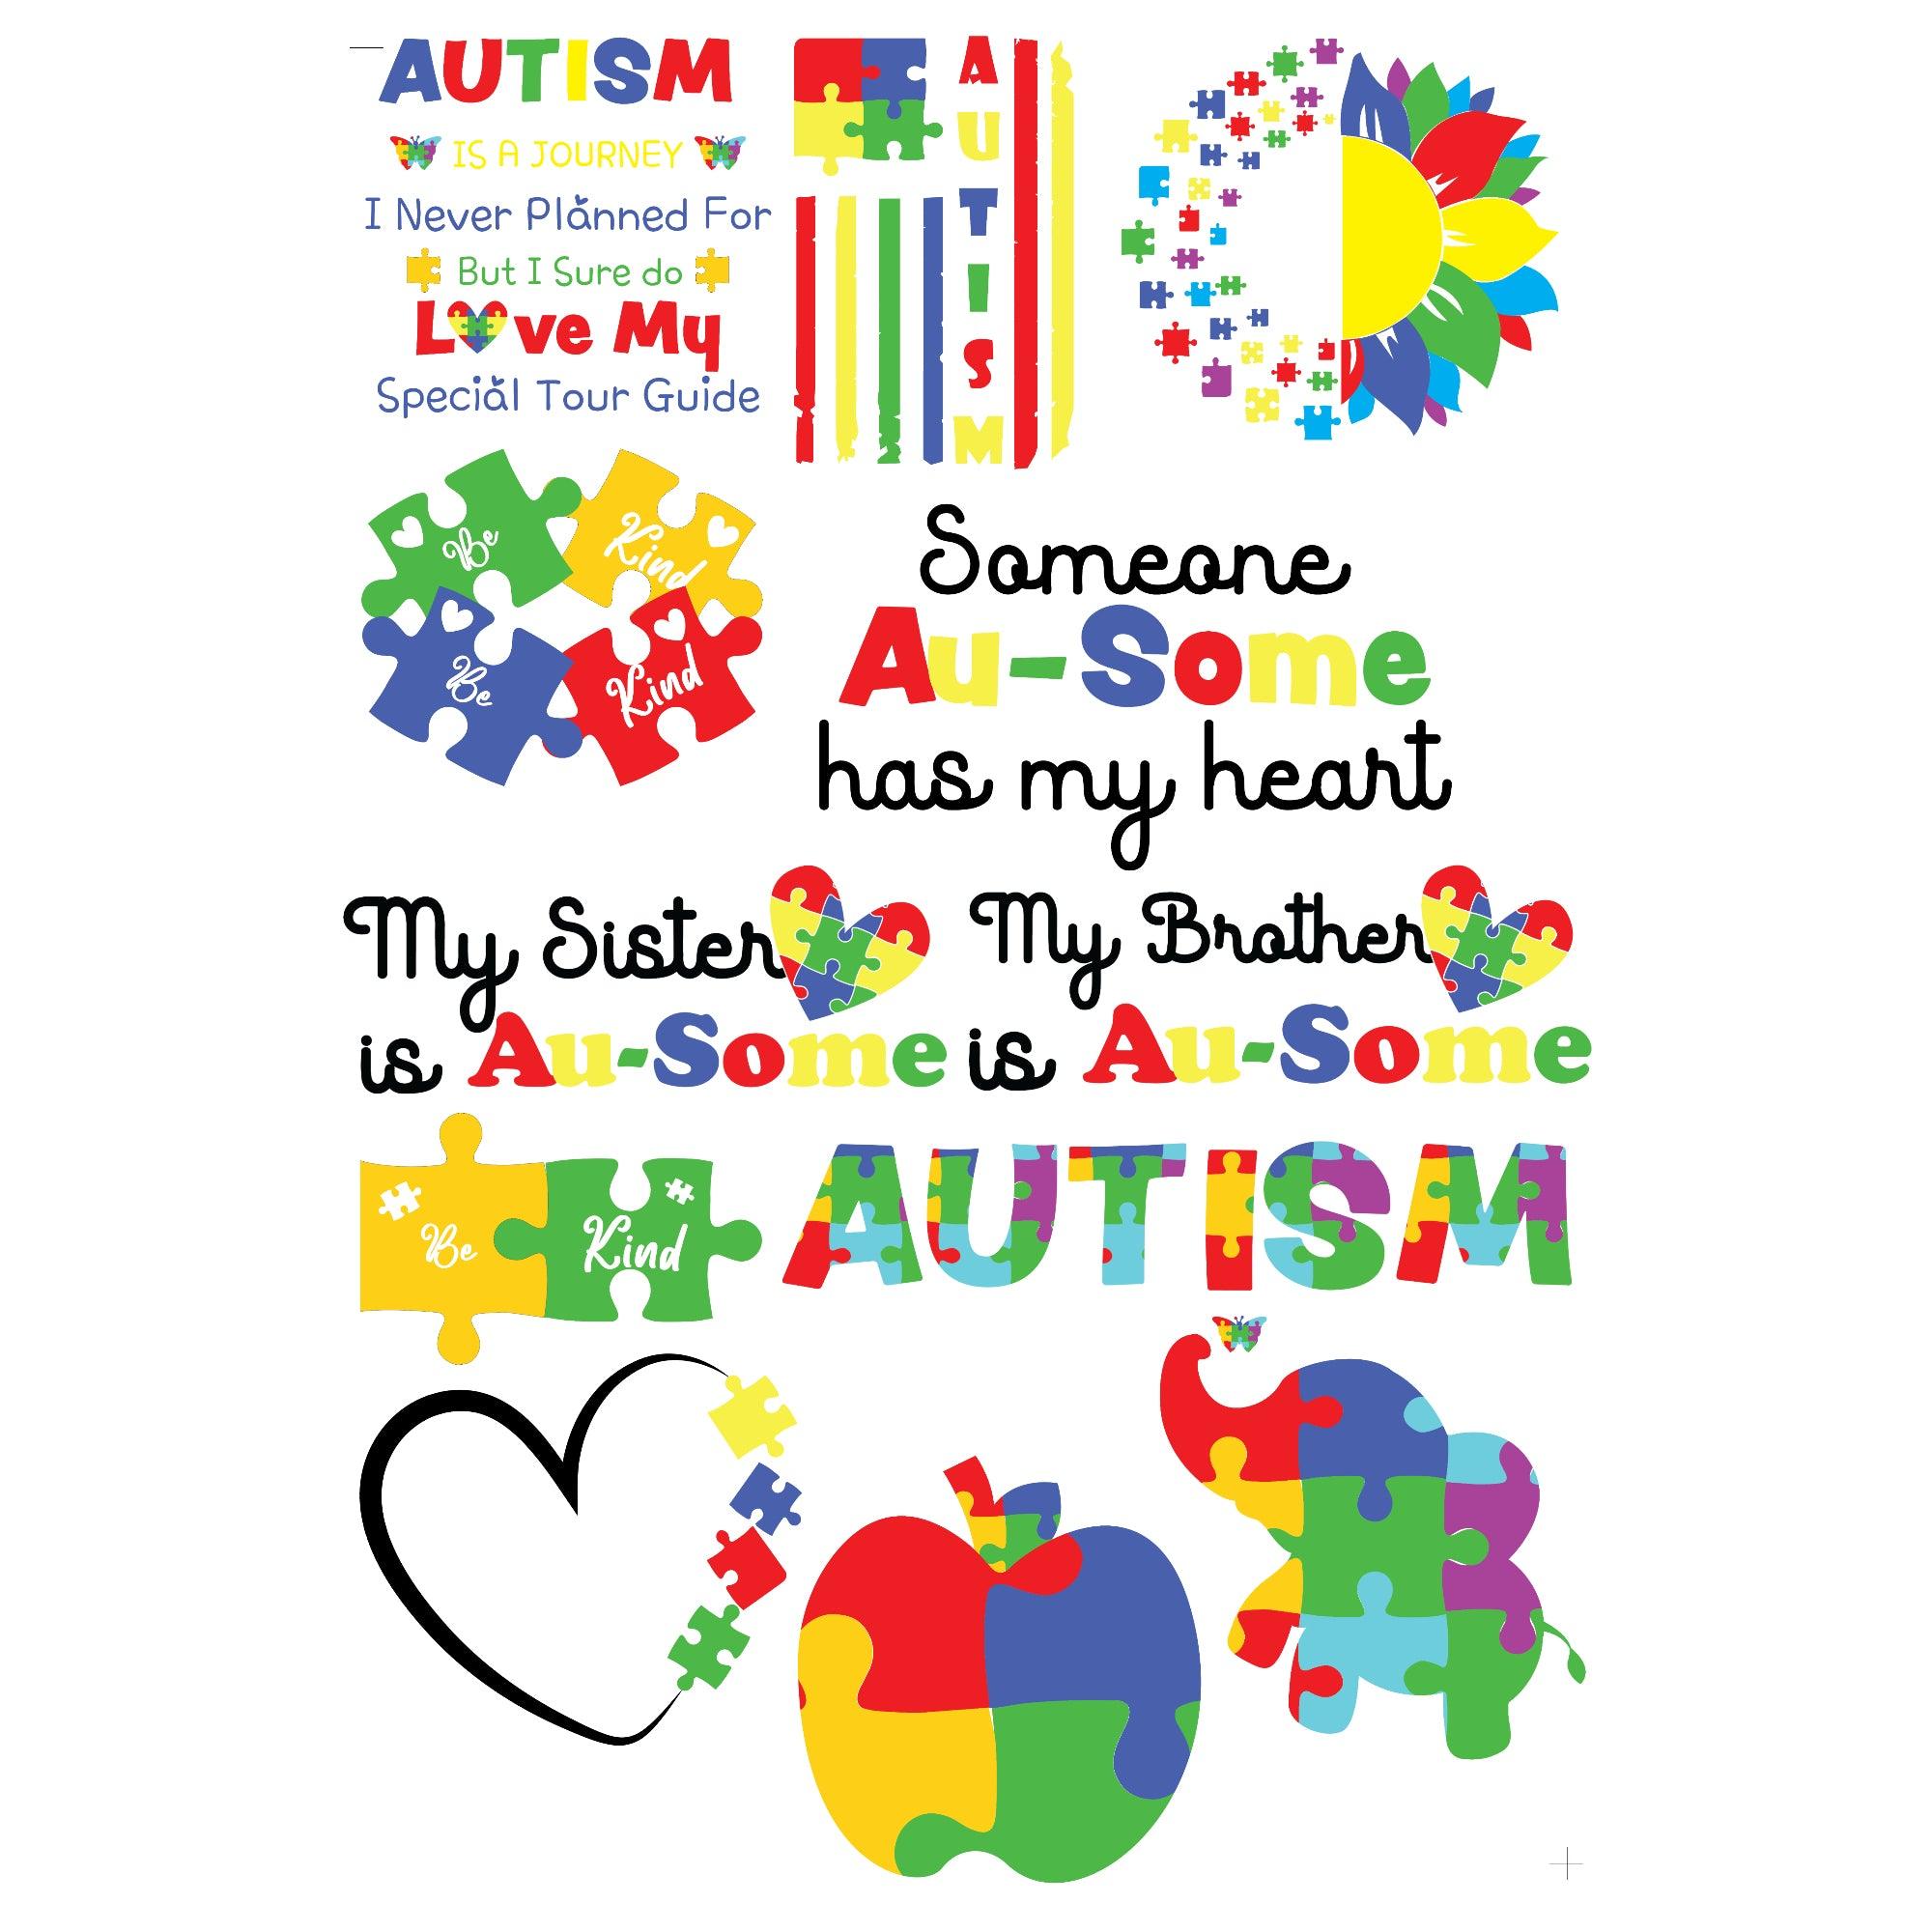 Autism Au-some Collection 12 x 12 Scrapbook & Embellishment Kit by SSC Designs - Scrapbook Supply Companies